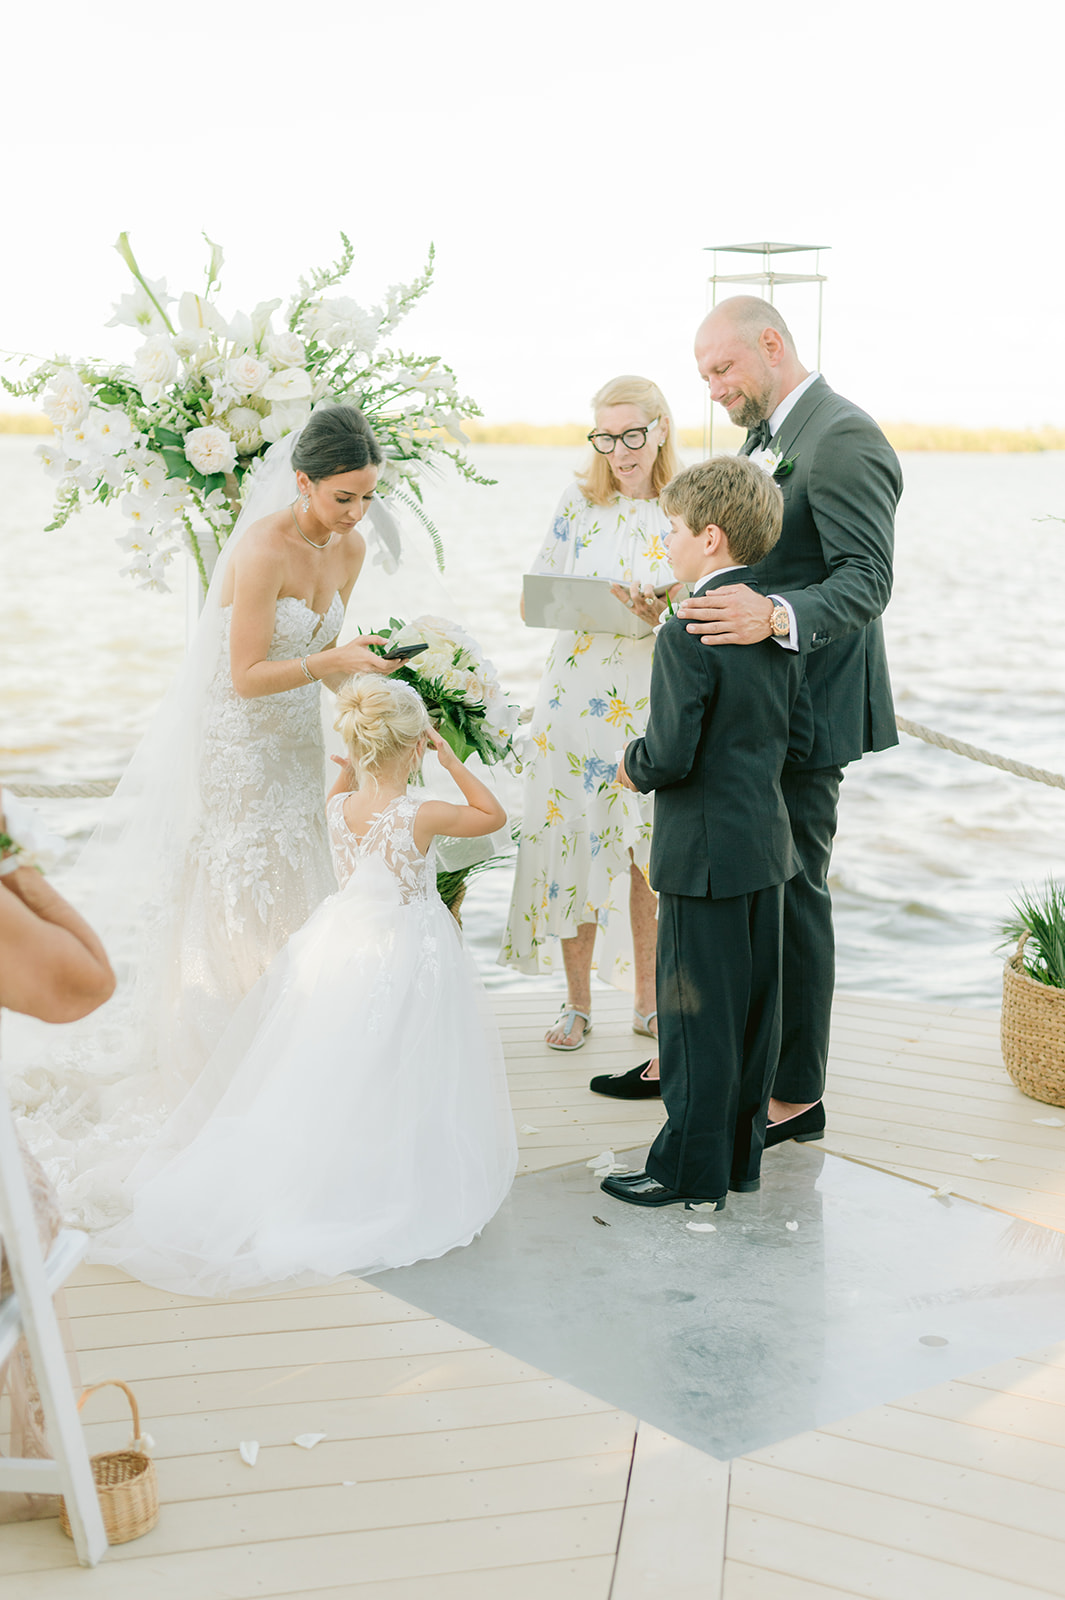 Fine Art Wedding Photography to Capture Your Naples Florida Wedding - Your Love Story in Images
